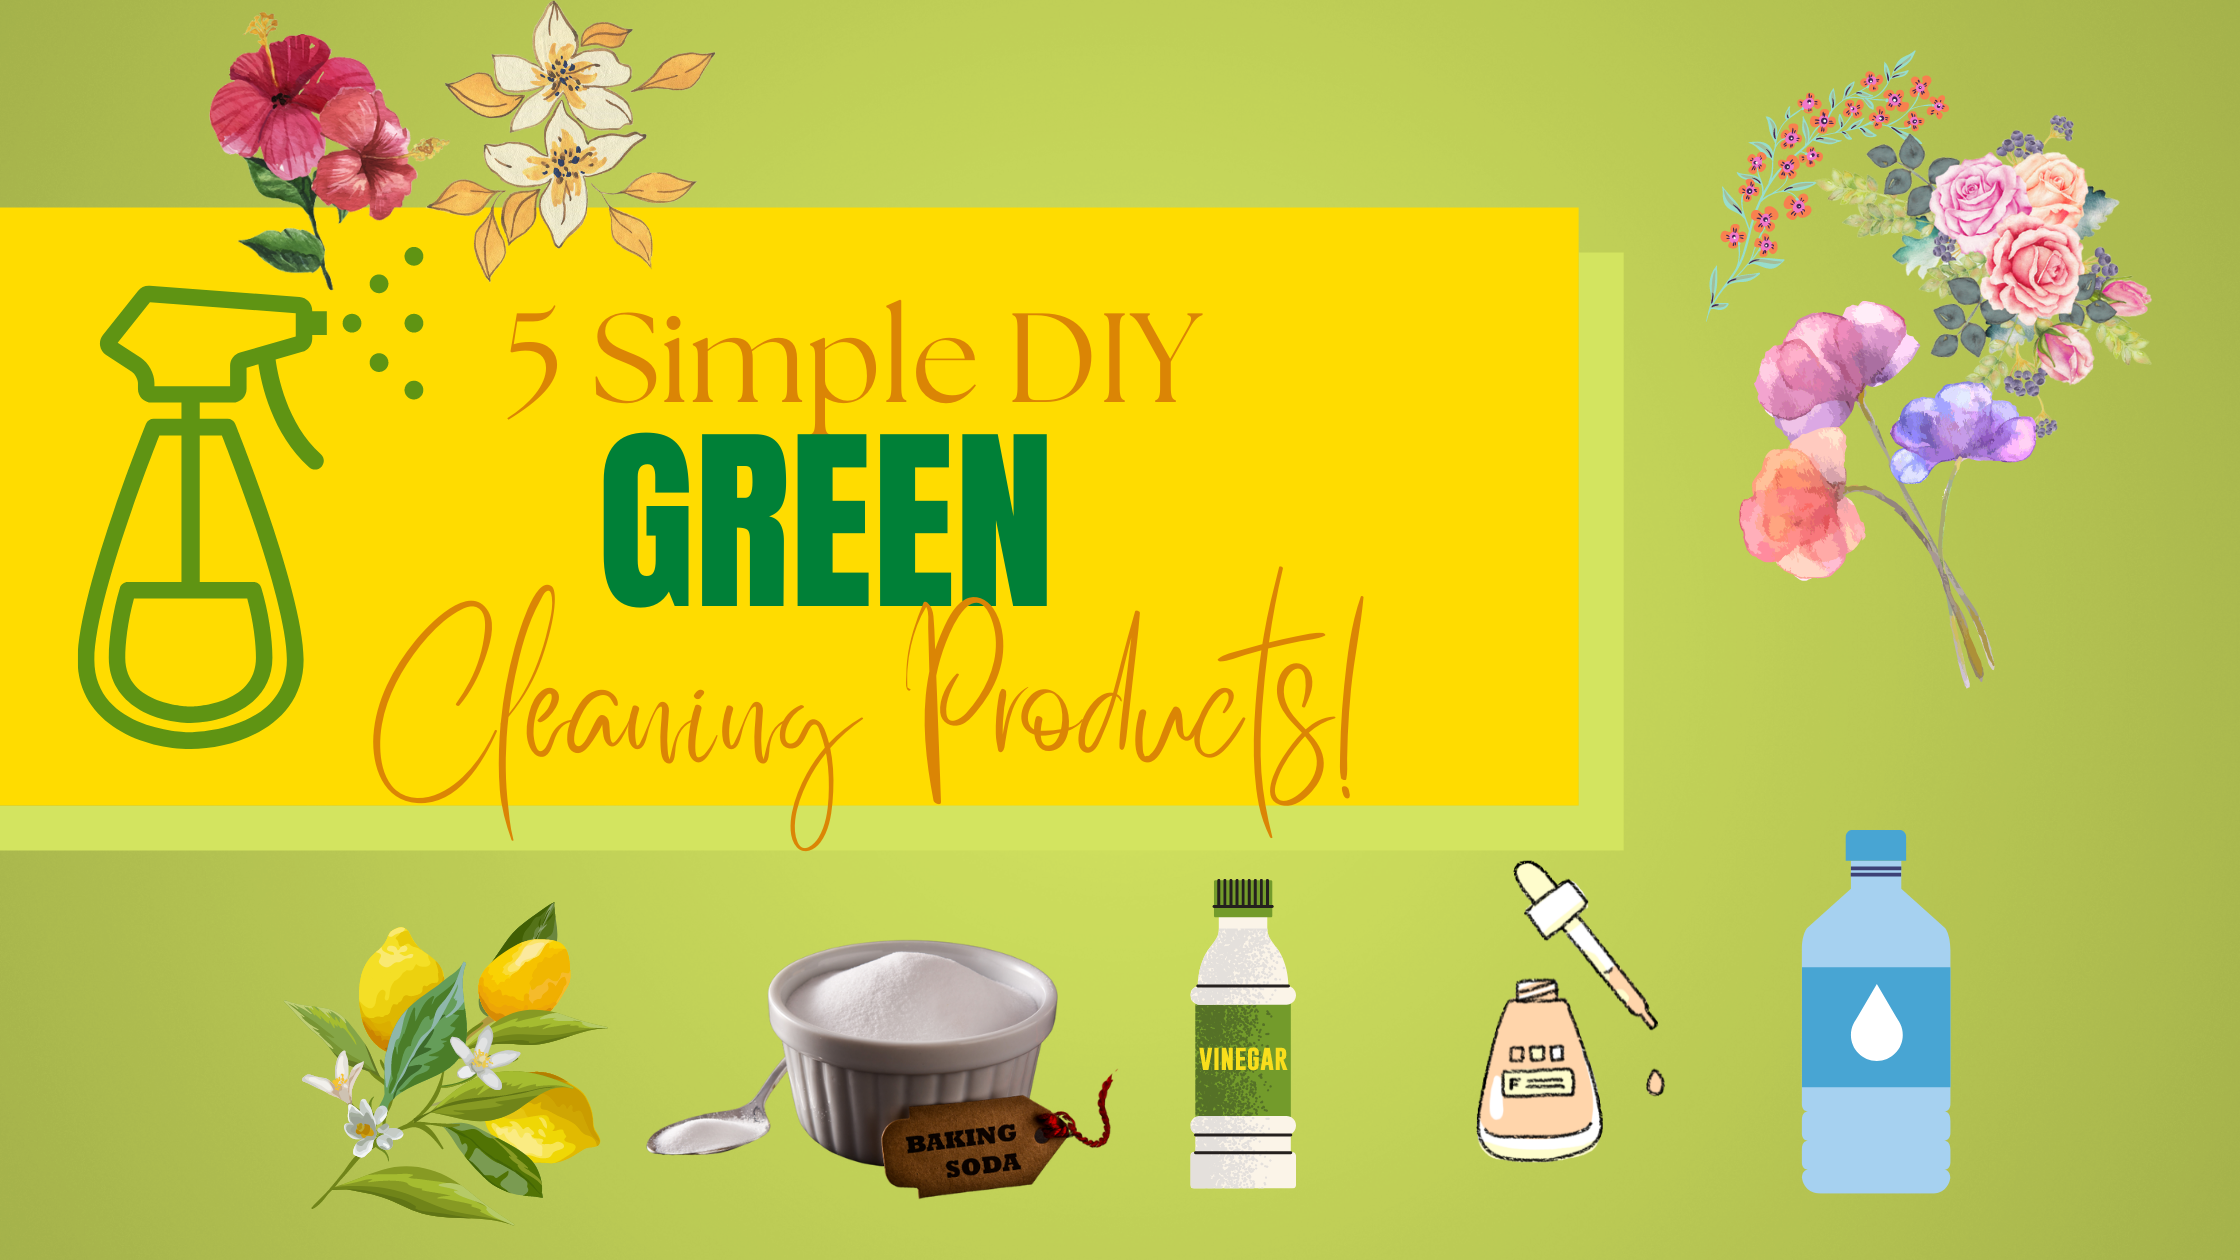 5 Simple DIY Green Cleaning Solutions for your Home!